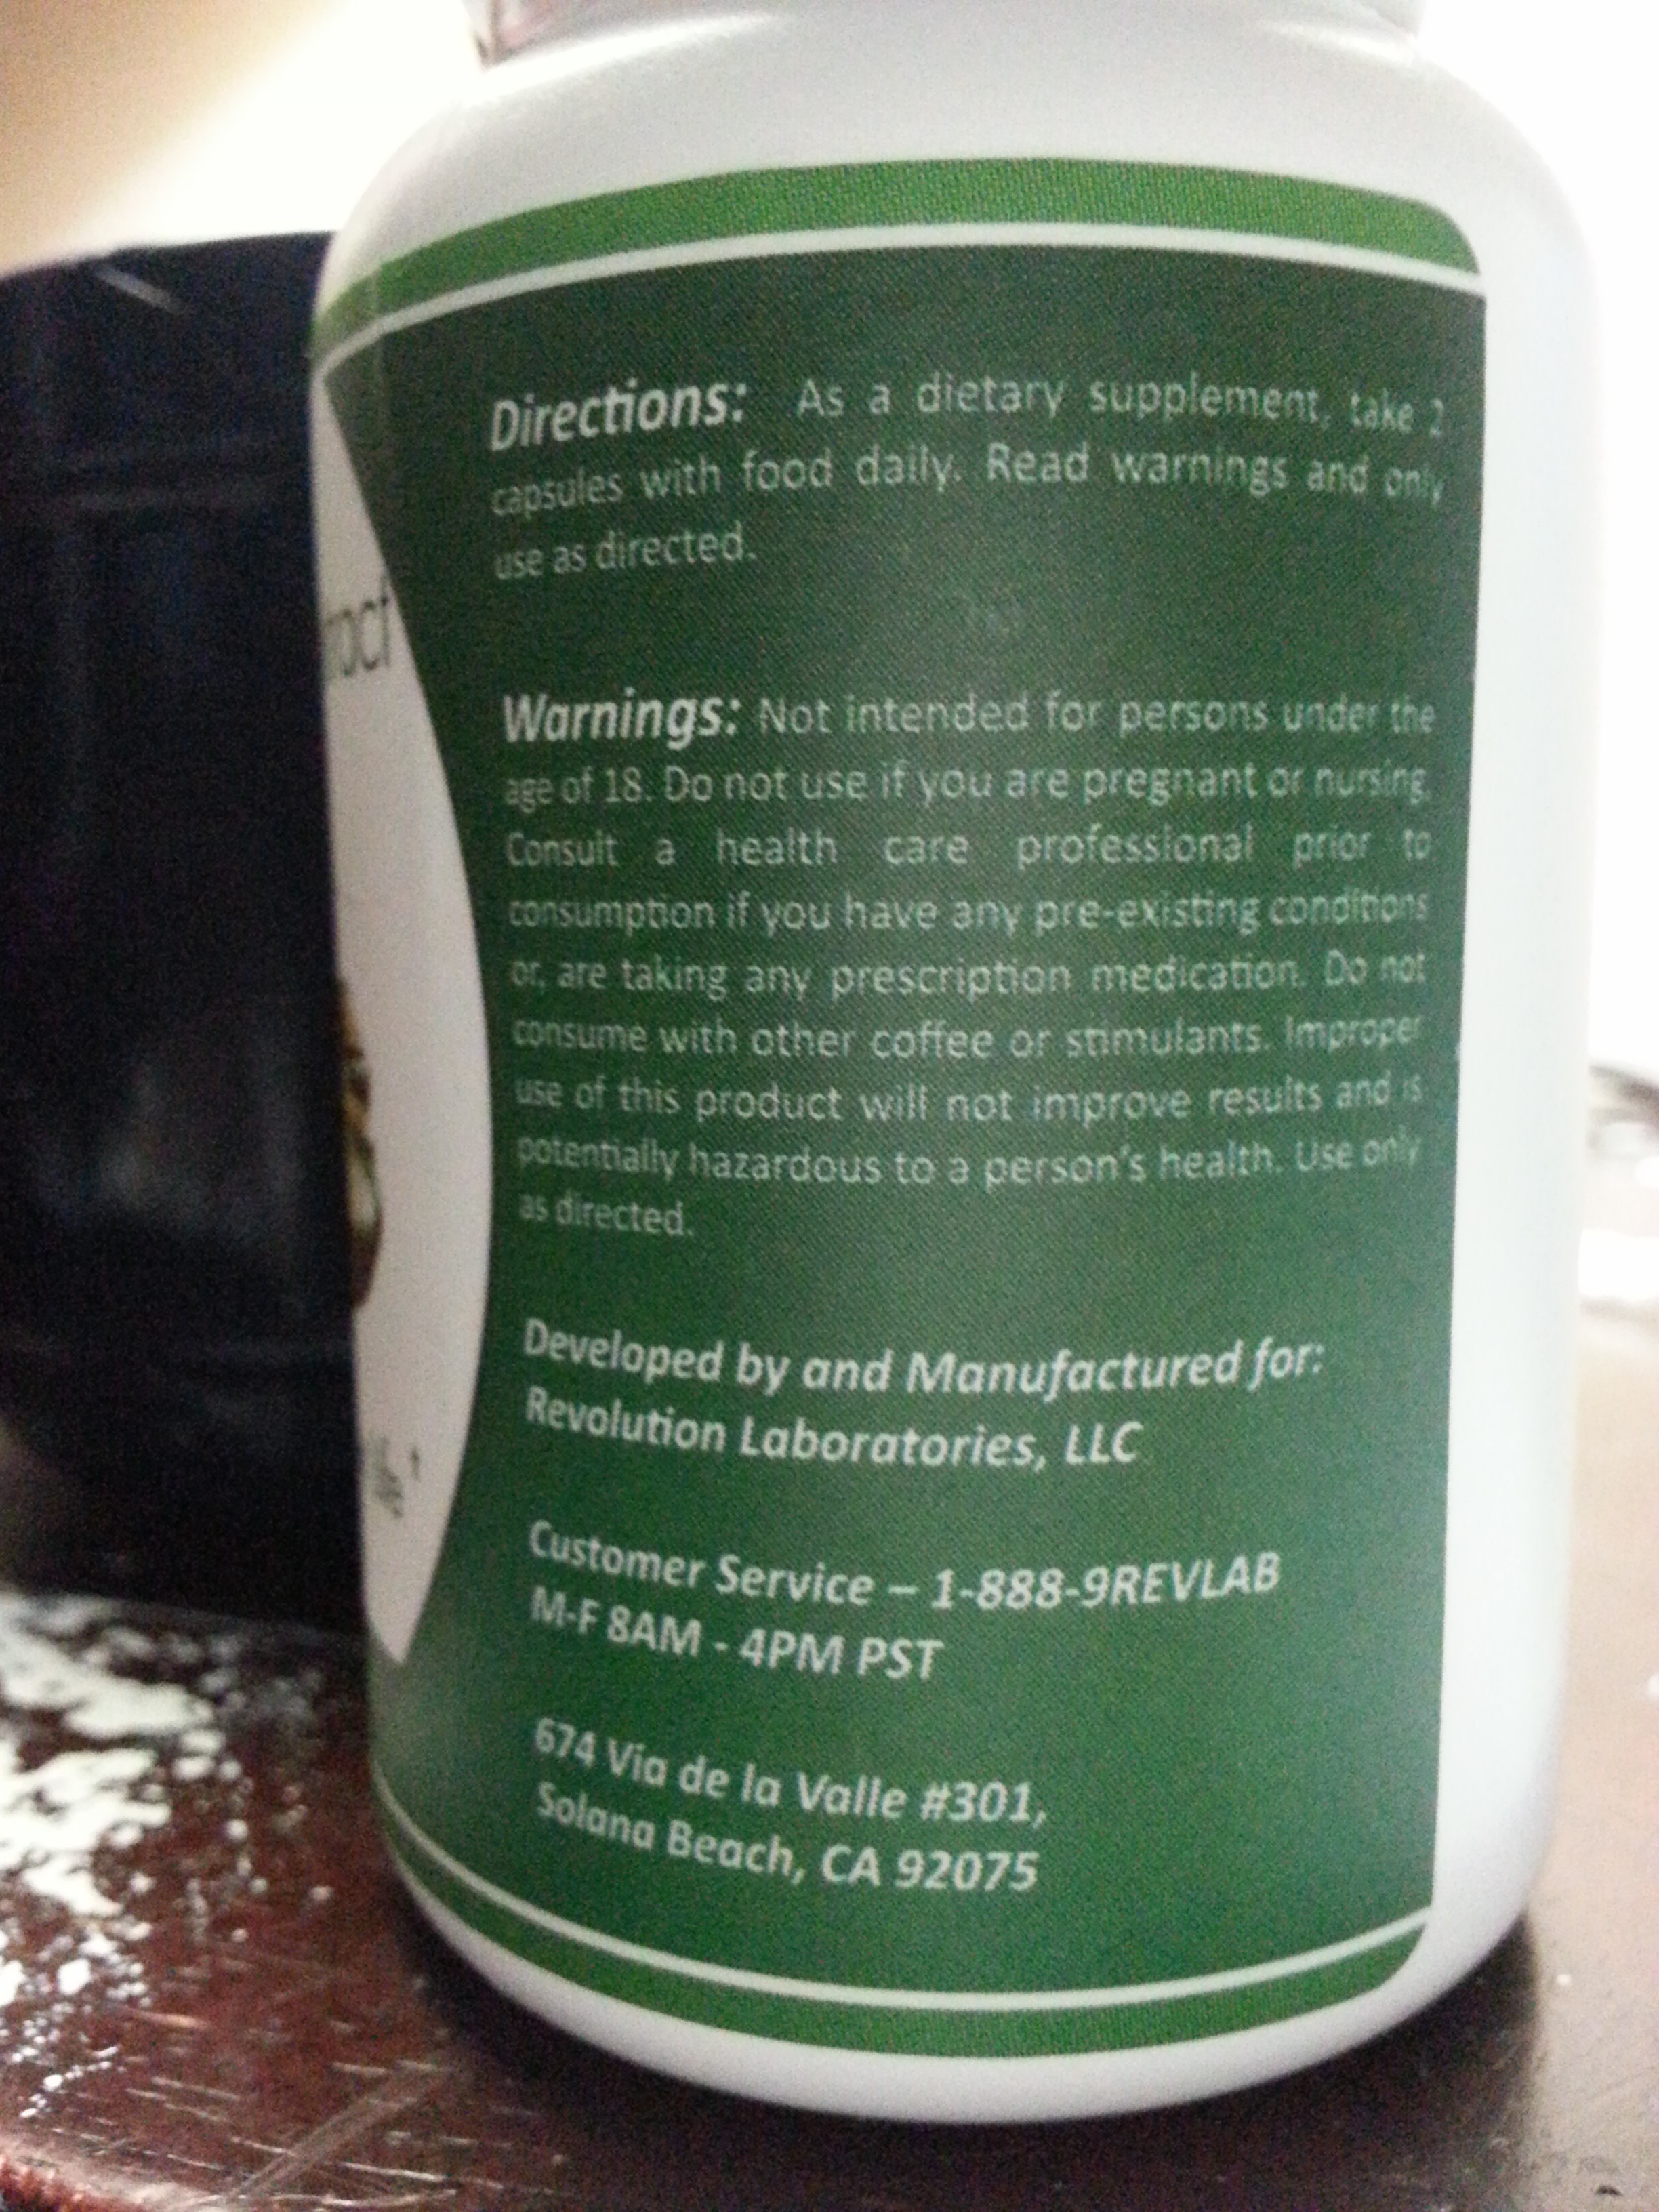 This is the side of the label that lists instructions, warnings and contact info. For what it's worth.